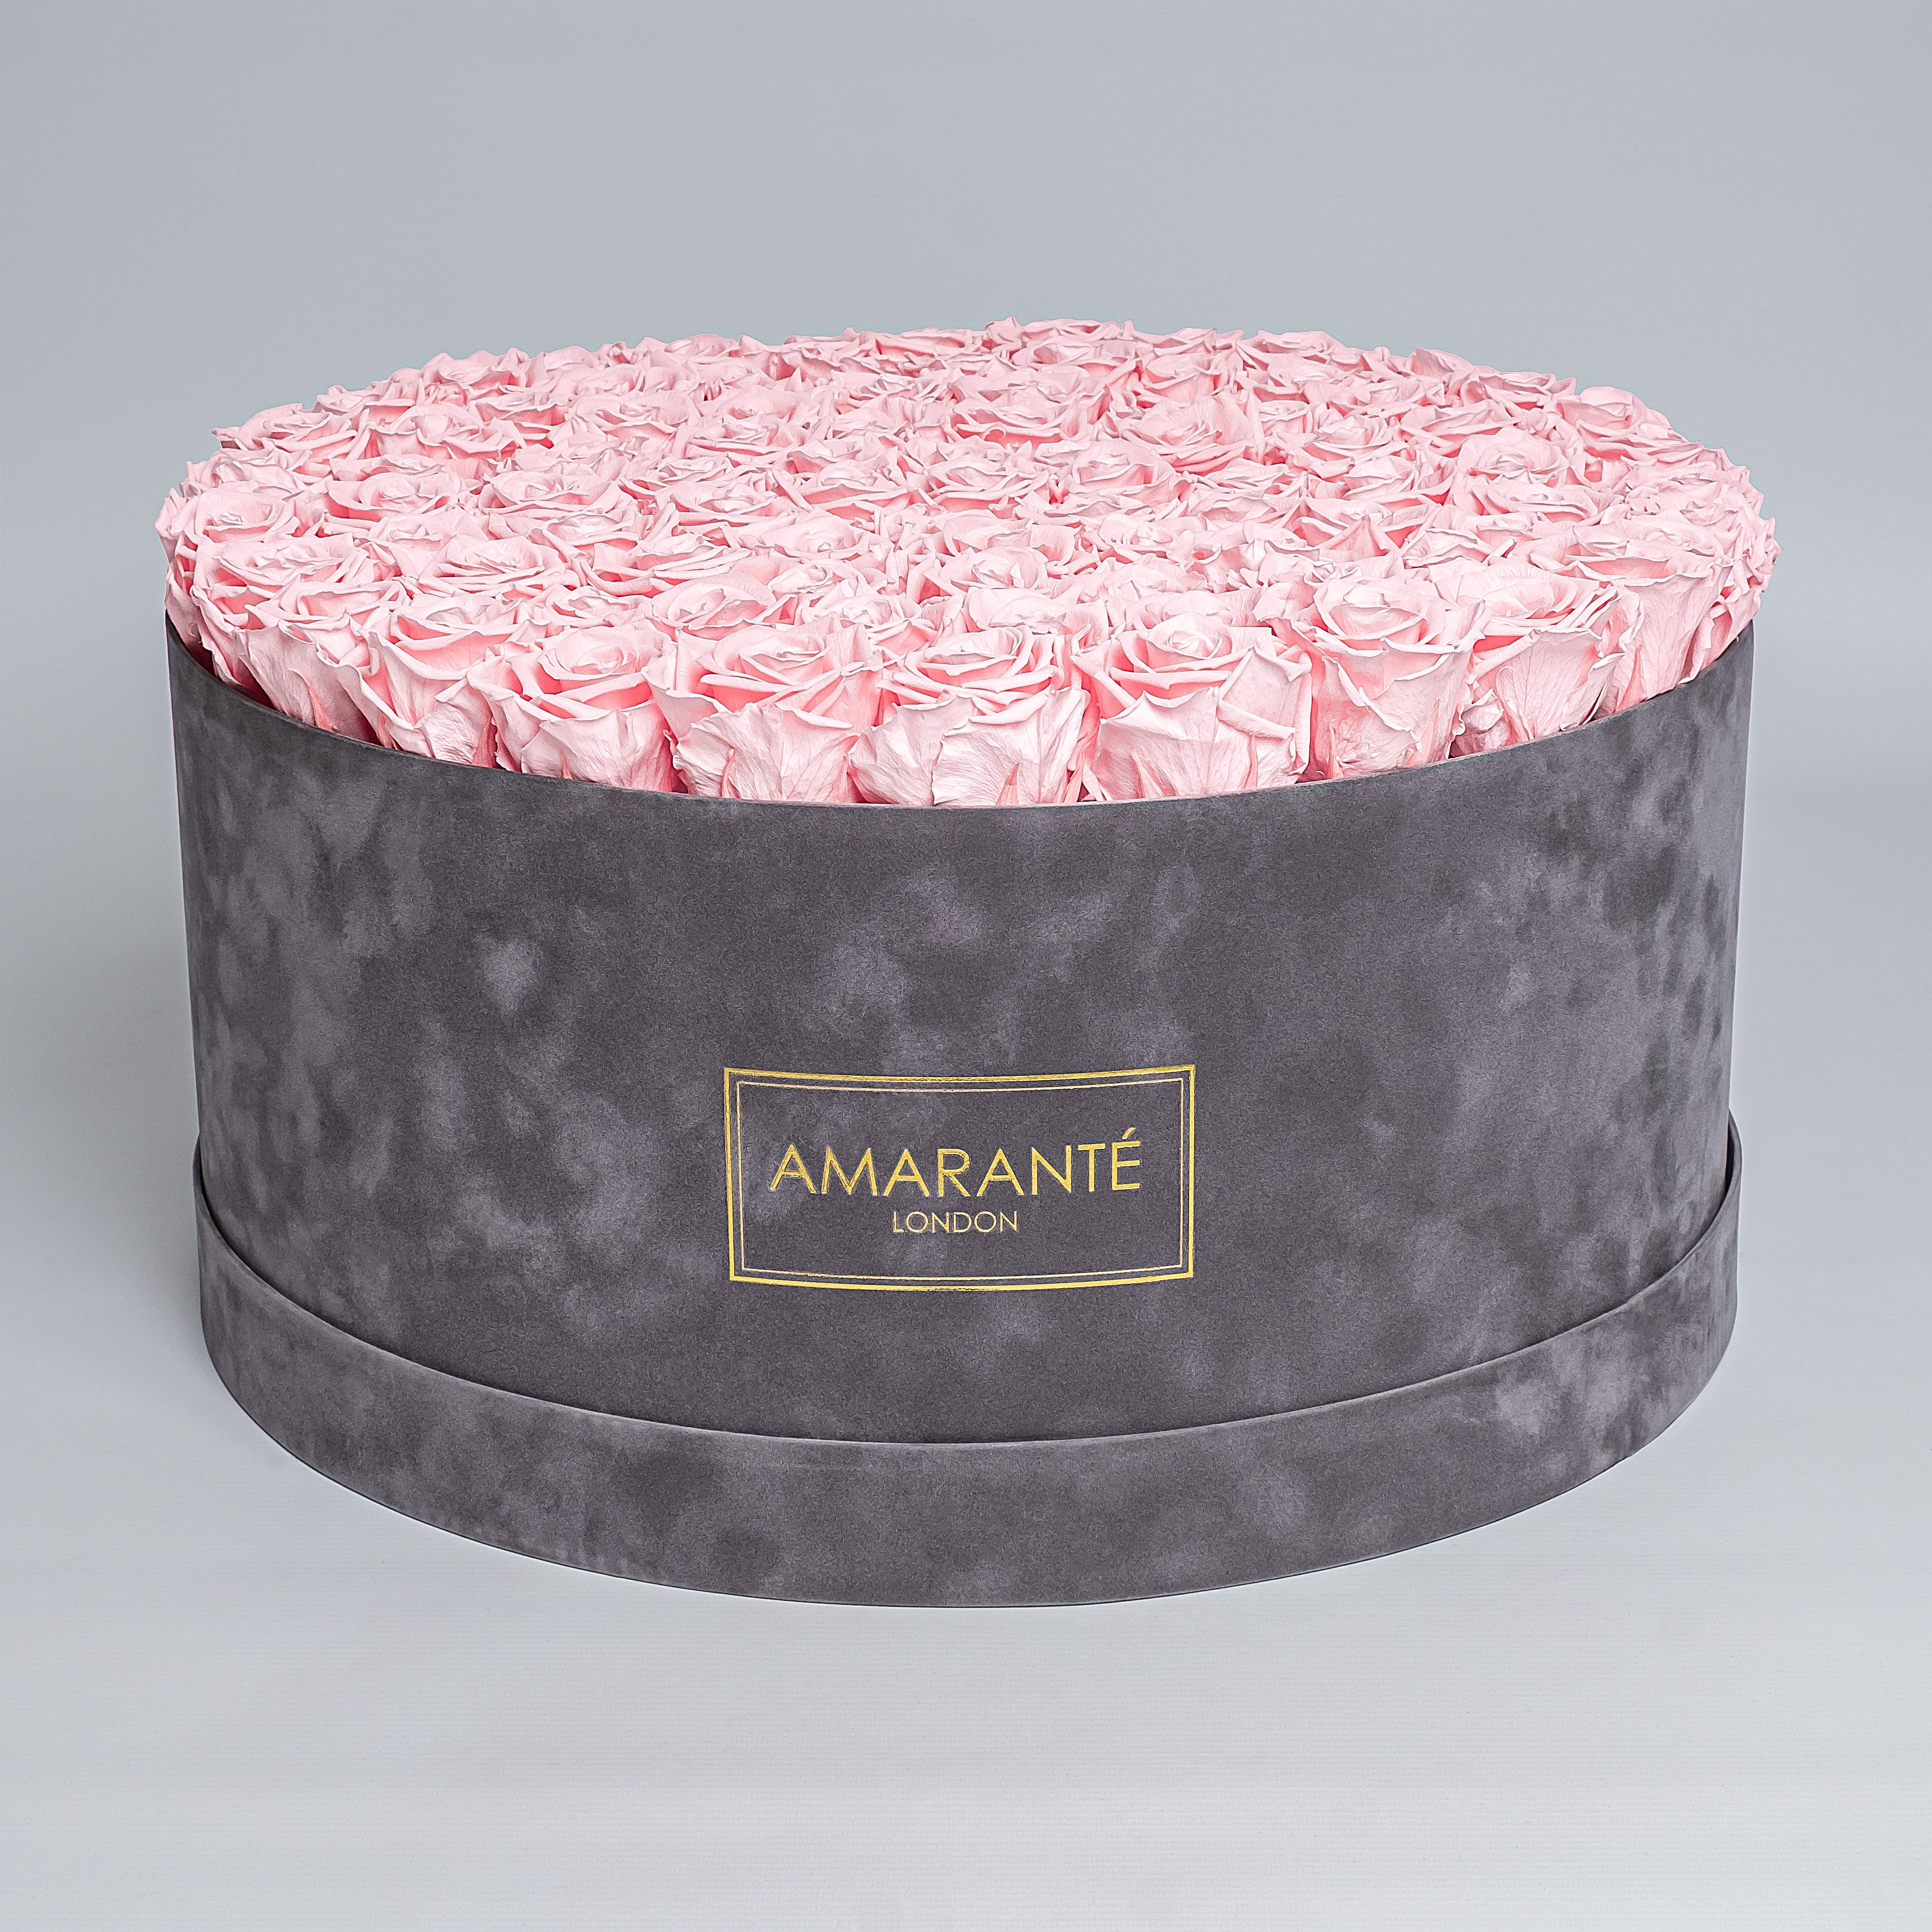 Luxurious grey suede rose box filled with enchanting delicate pink infinity roses showcasing refined style and grace. Ideal for family and friends that appreciate trendy and classy gifts on special occasions. Free UK Delivery.